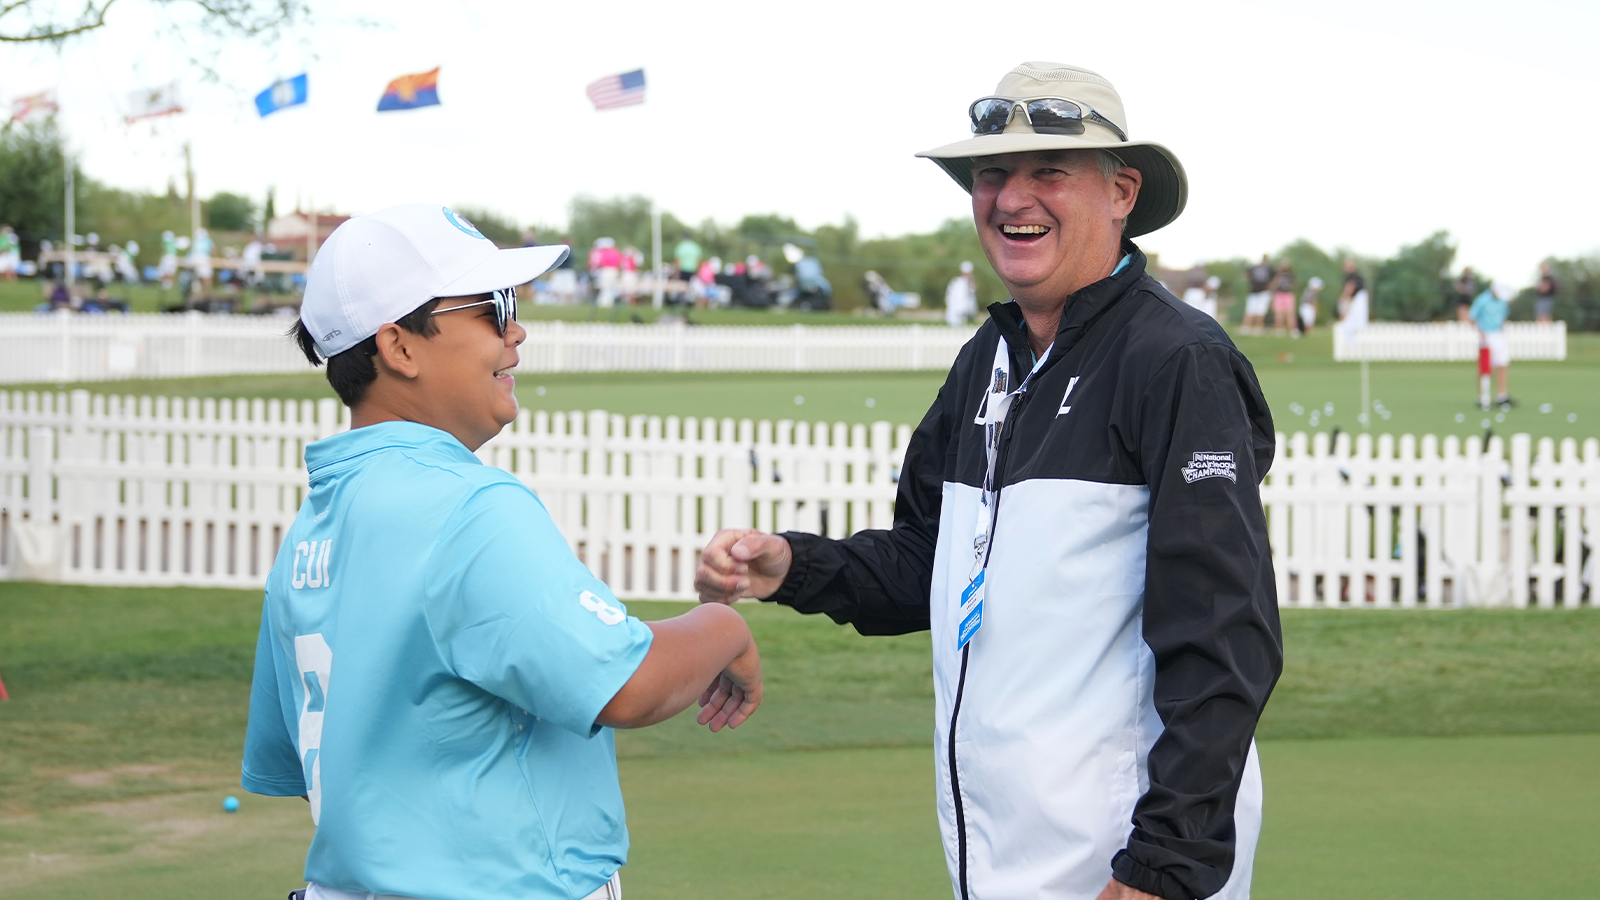 William Cui of Team Illinois talks with Coach Kevin Weeks, PGA, during the first round of the 2022 National Car Rental PGA Jr. League Championship. (Photo by Darren Carroll/PGA of America)